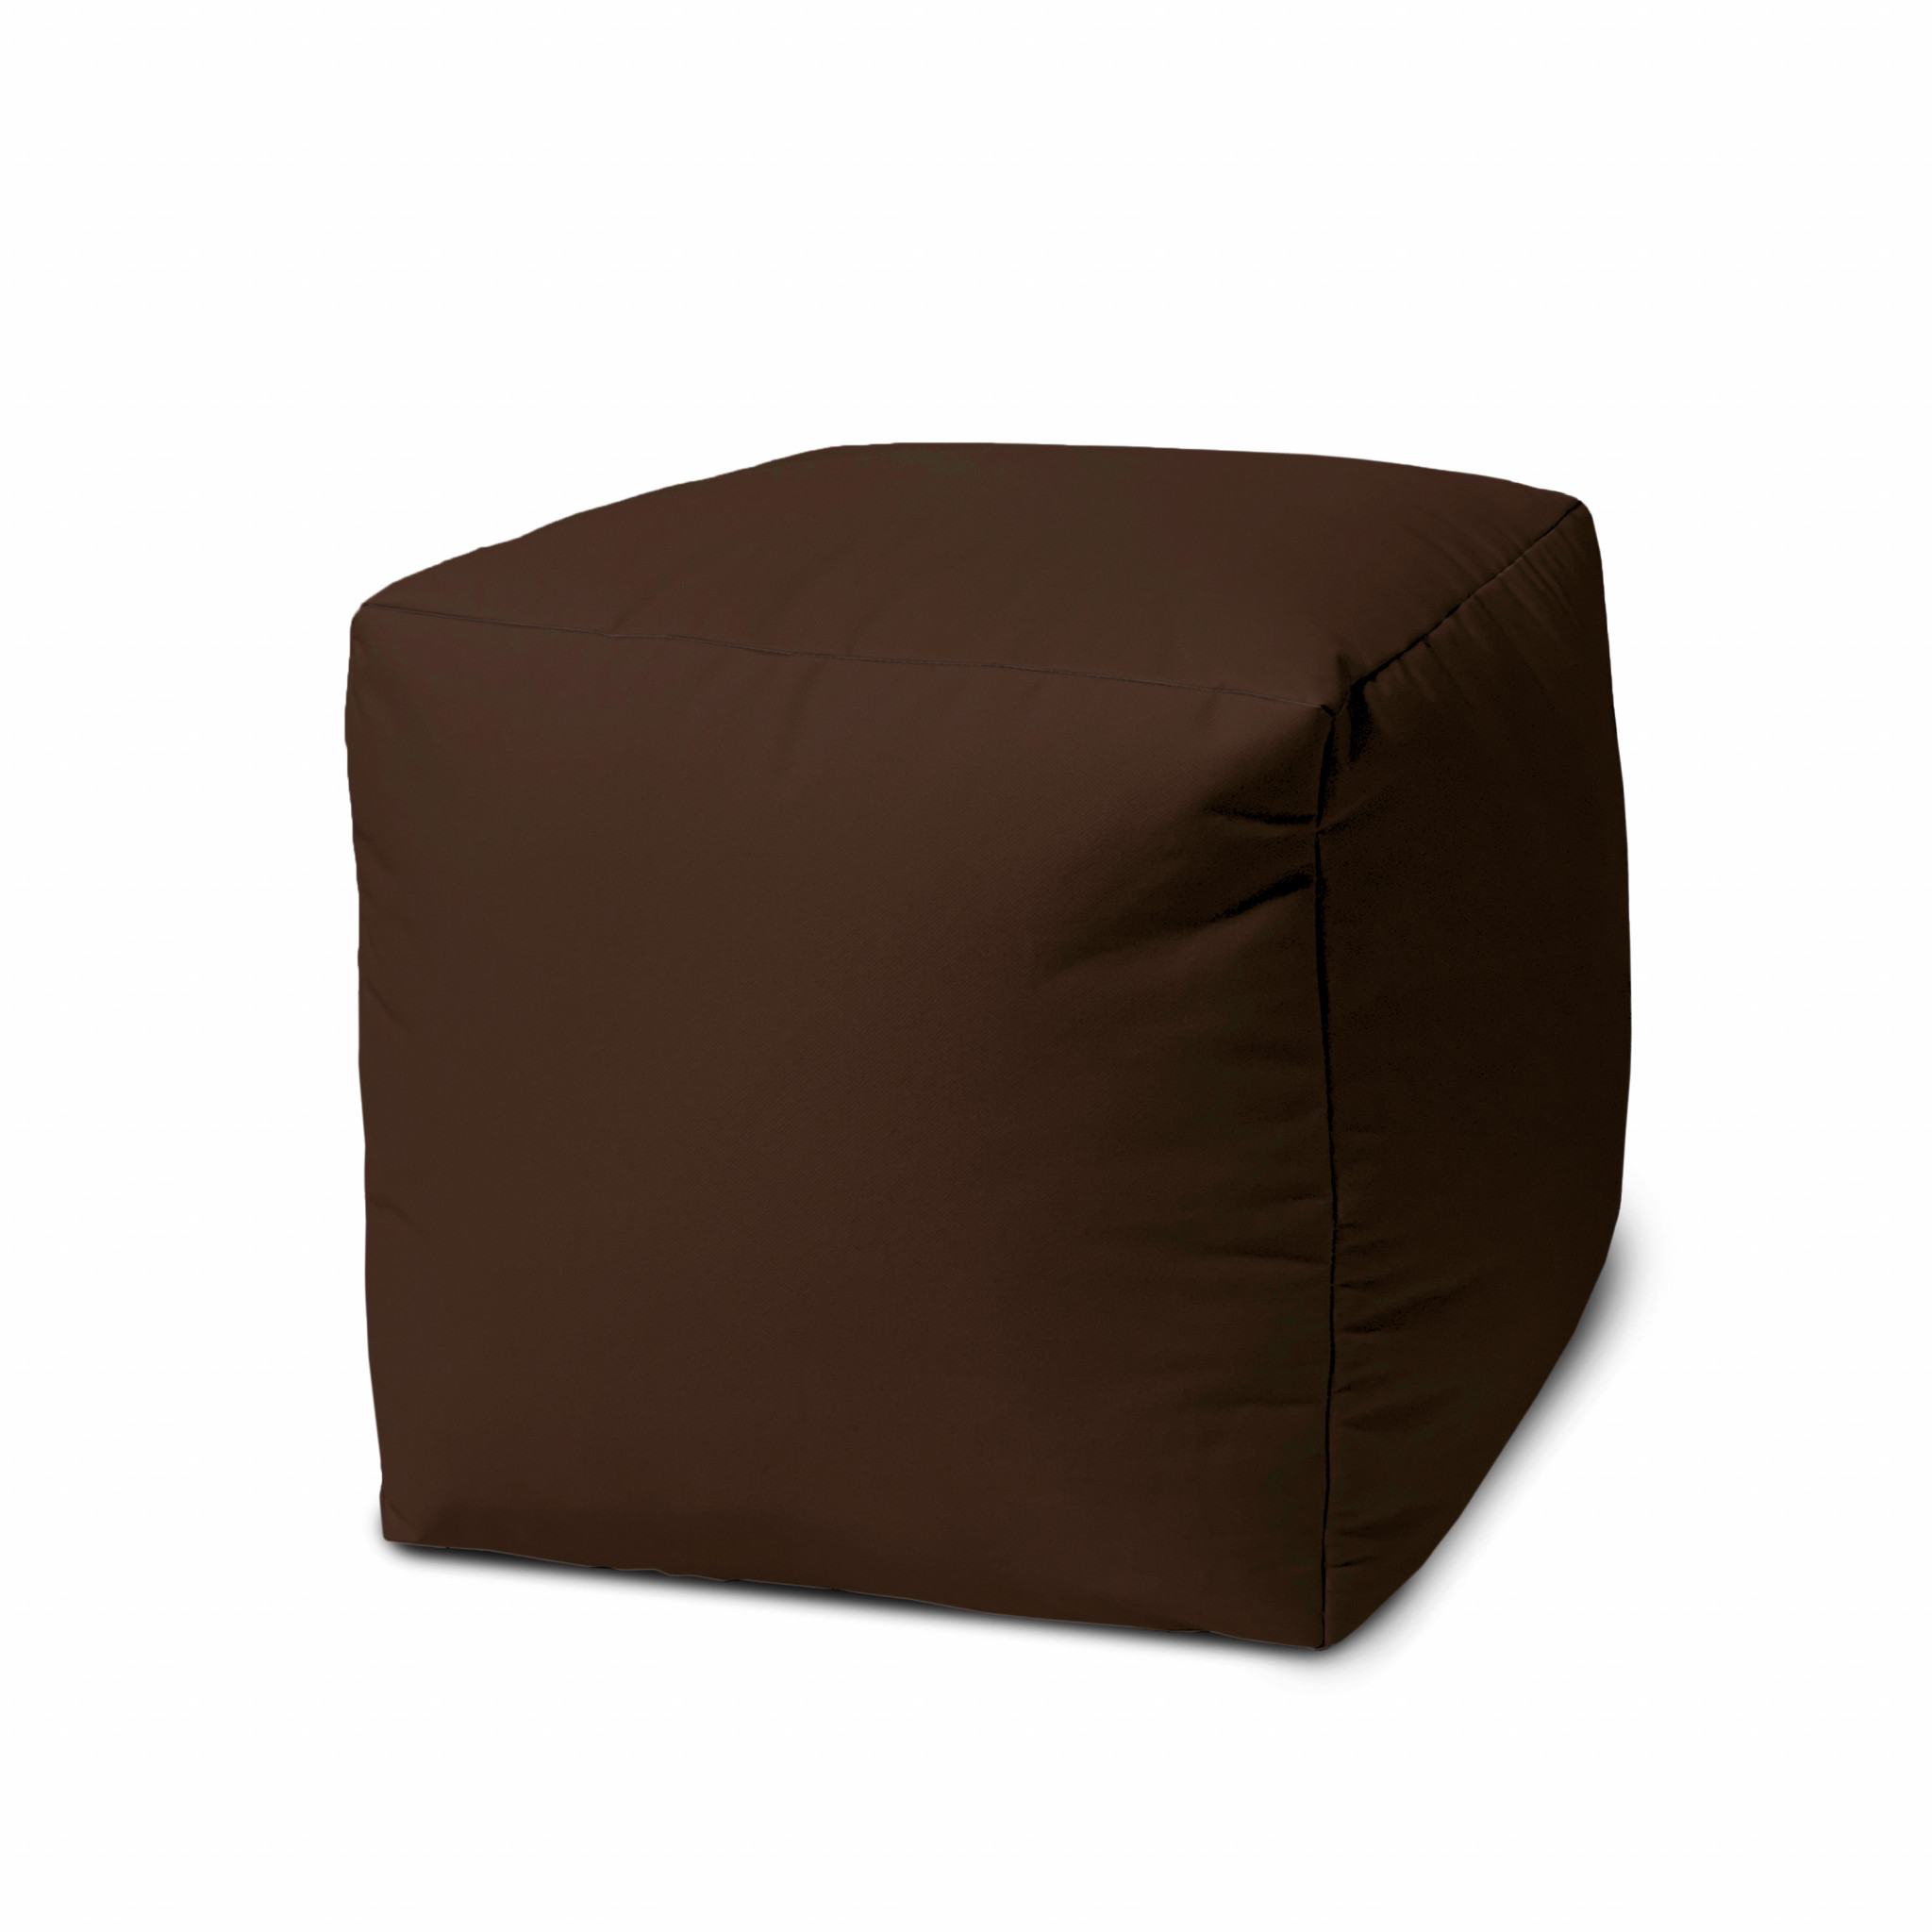 17" Cool Dark Chocolate Brown Solid Color Indoor Outdoor Pouf Ottoman-474185-1